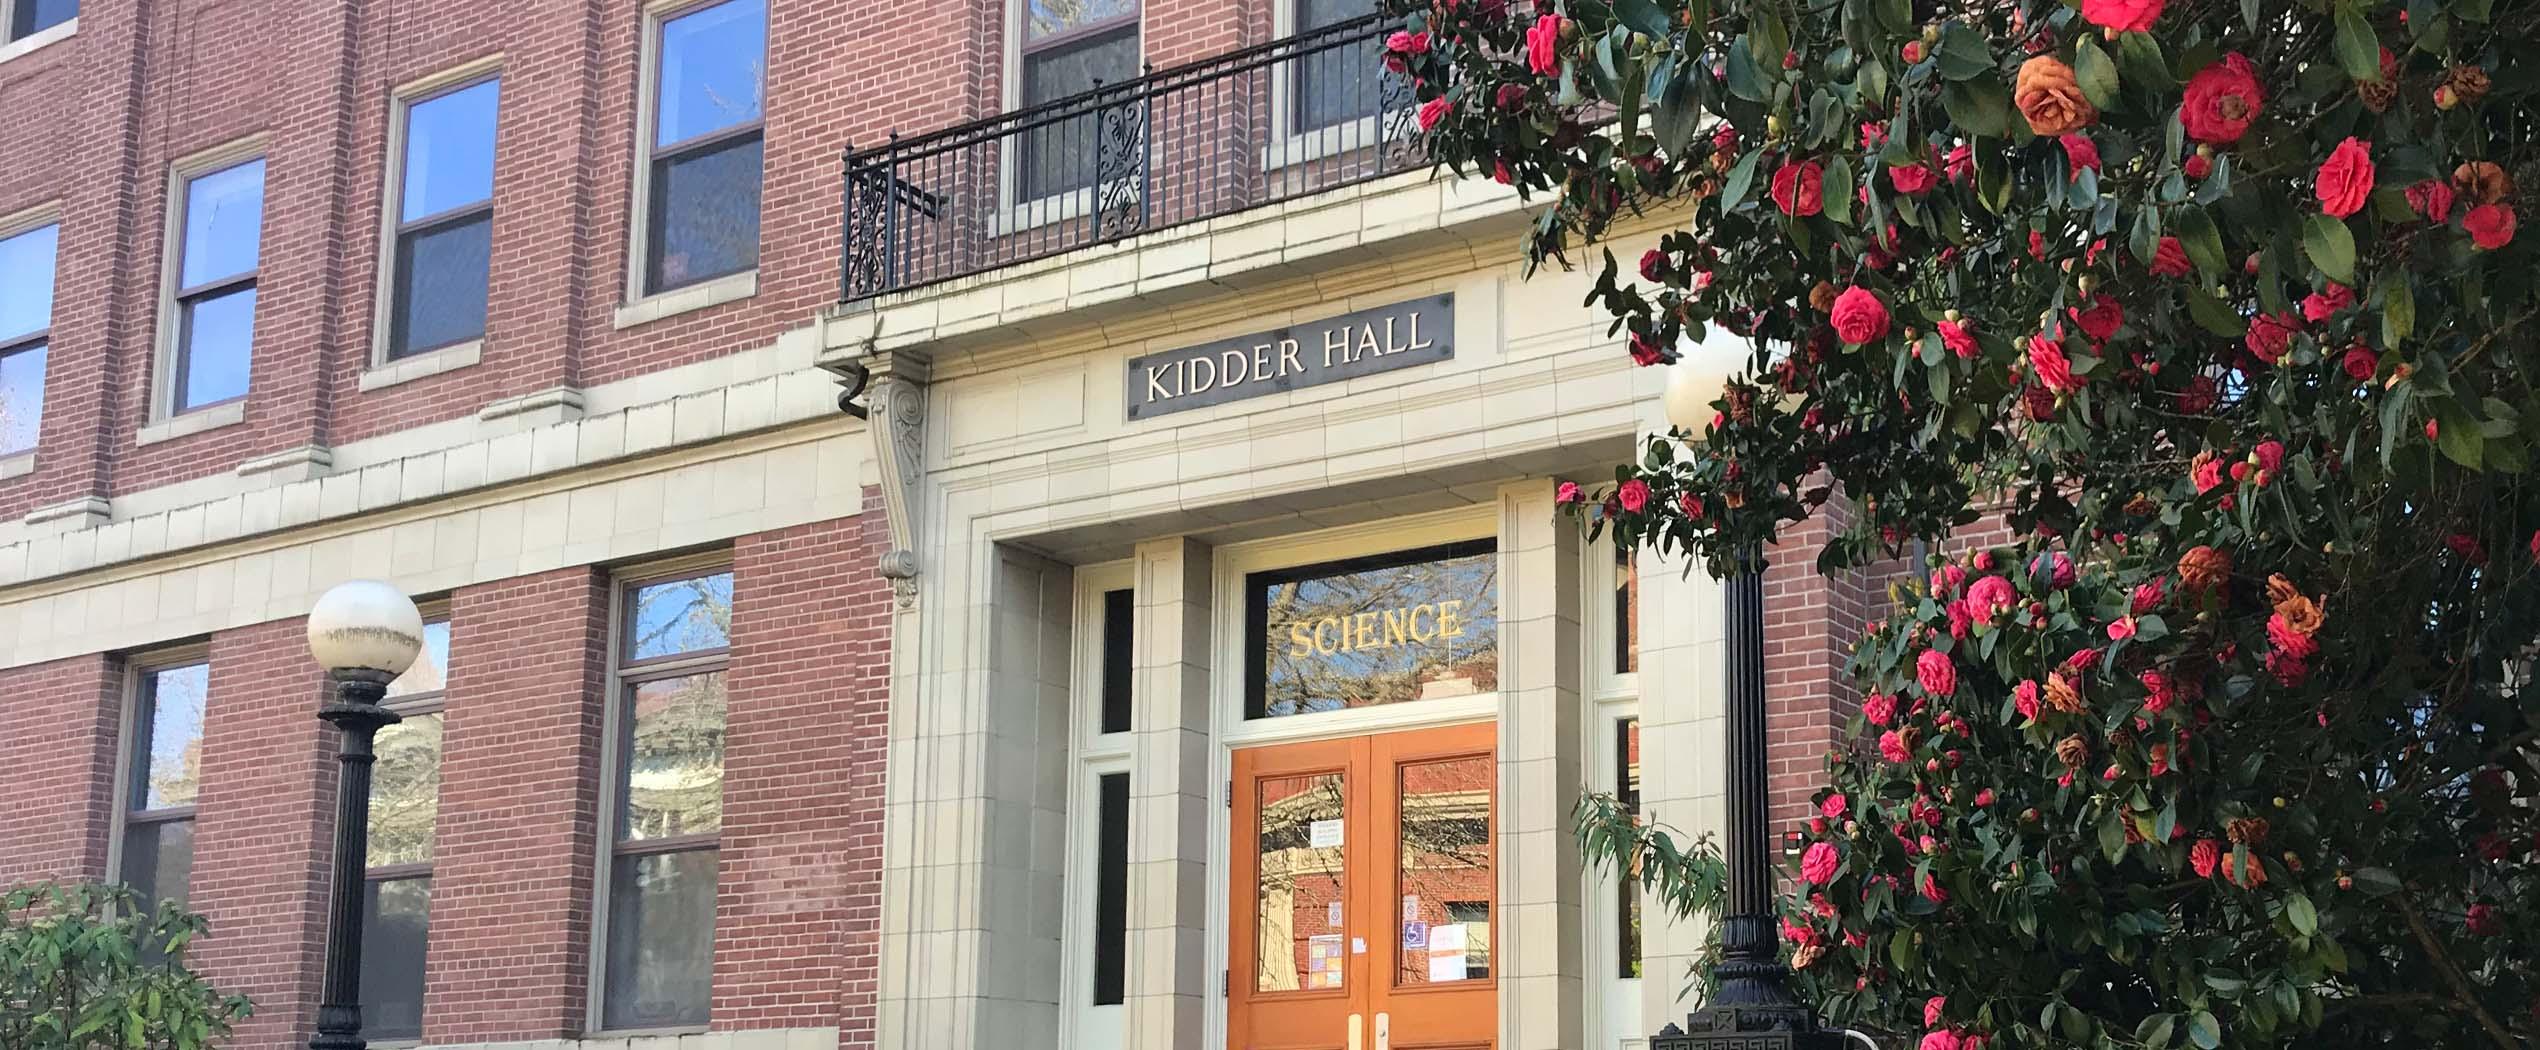 Front of Kidder hall with flowers in foreground.